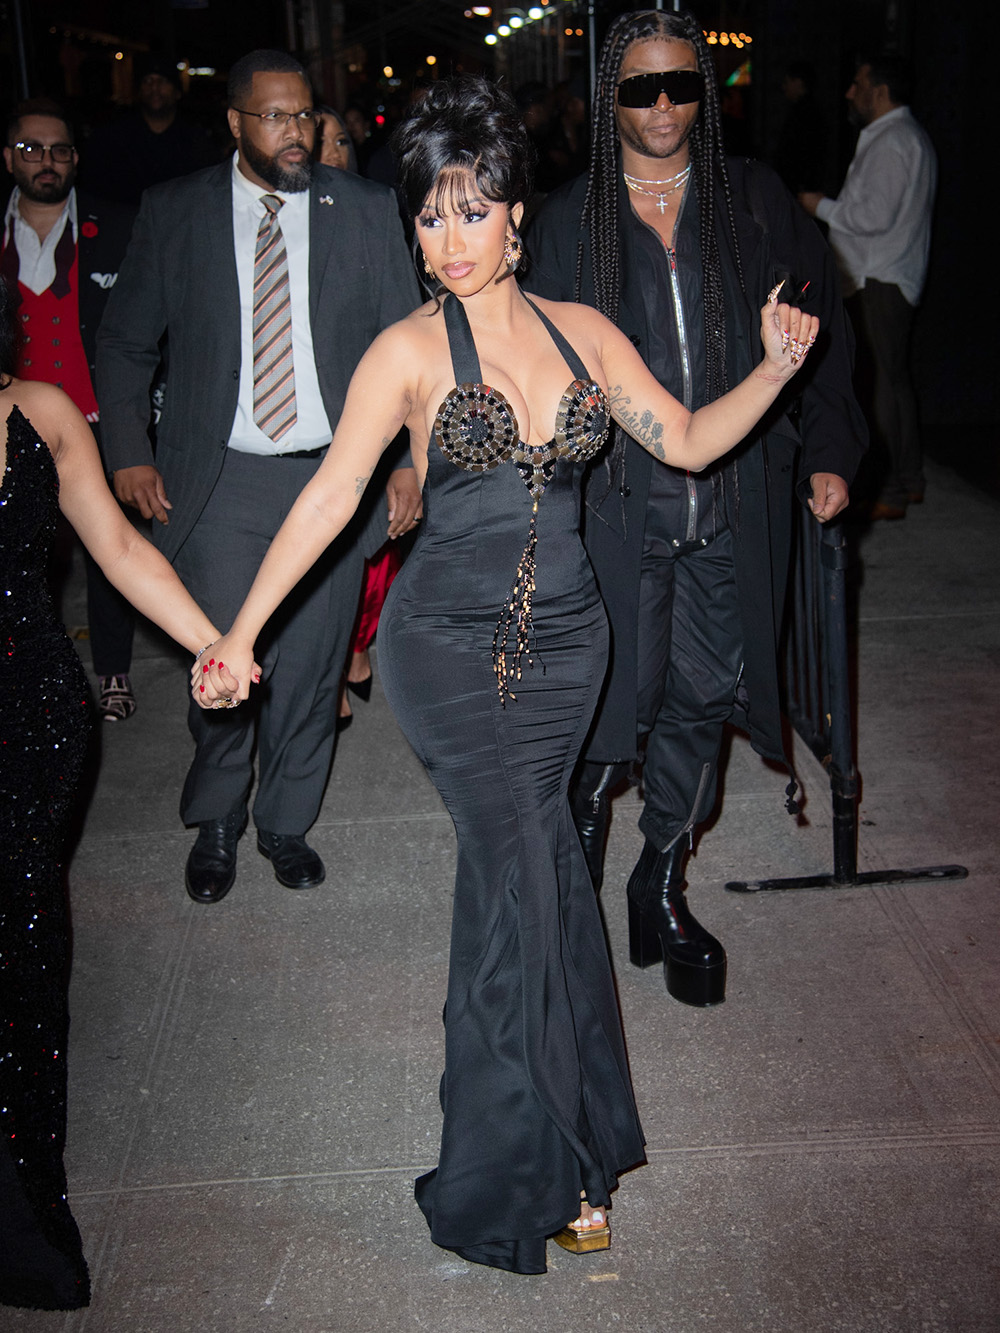 Met Gala 2022 afterparties, inside - best photos and outfit changes, Gallery